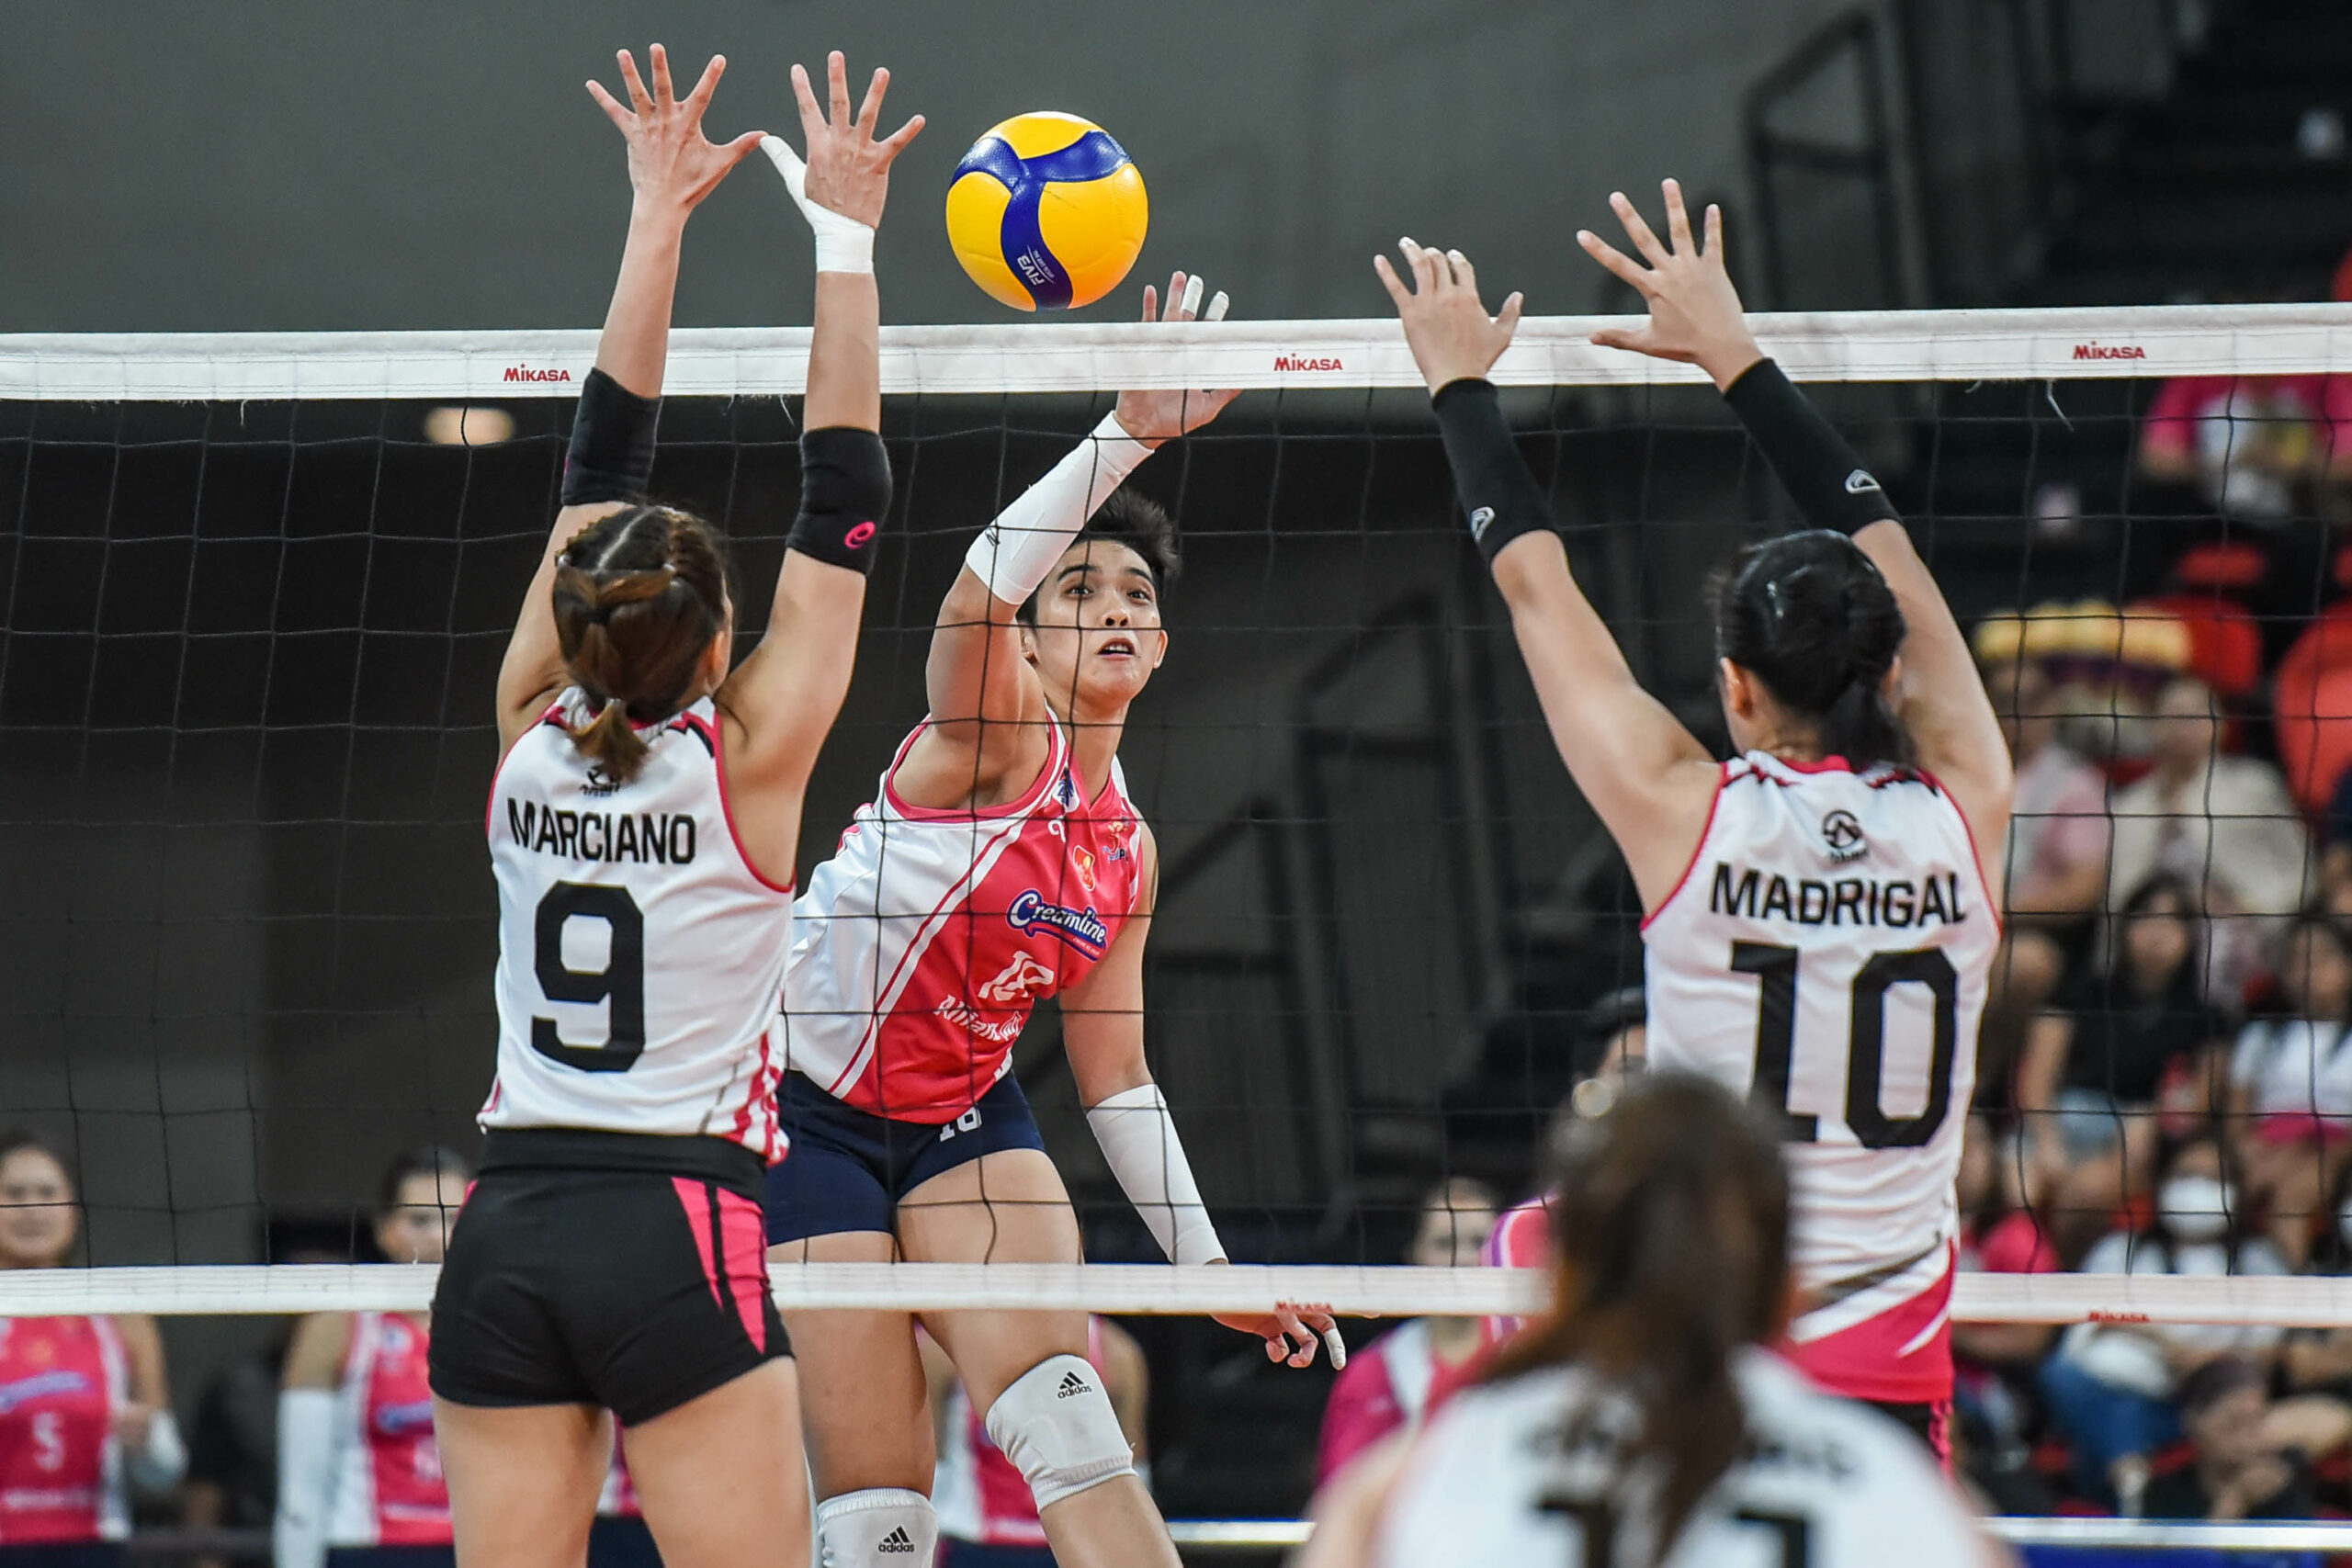 PVL-AFC-Creamline-vs.-Akari-Tots-Carlos-6086-scaled Facing tall Akari was a learning experience for Creamline, says Tots Carlos News PVL Volleyball  - philippine sports news